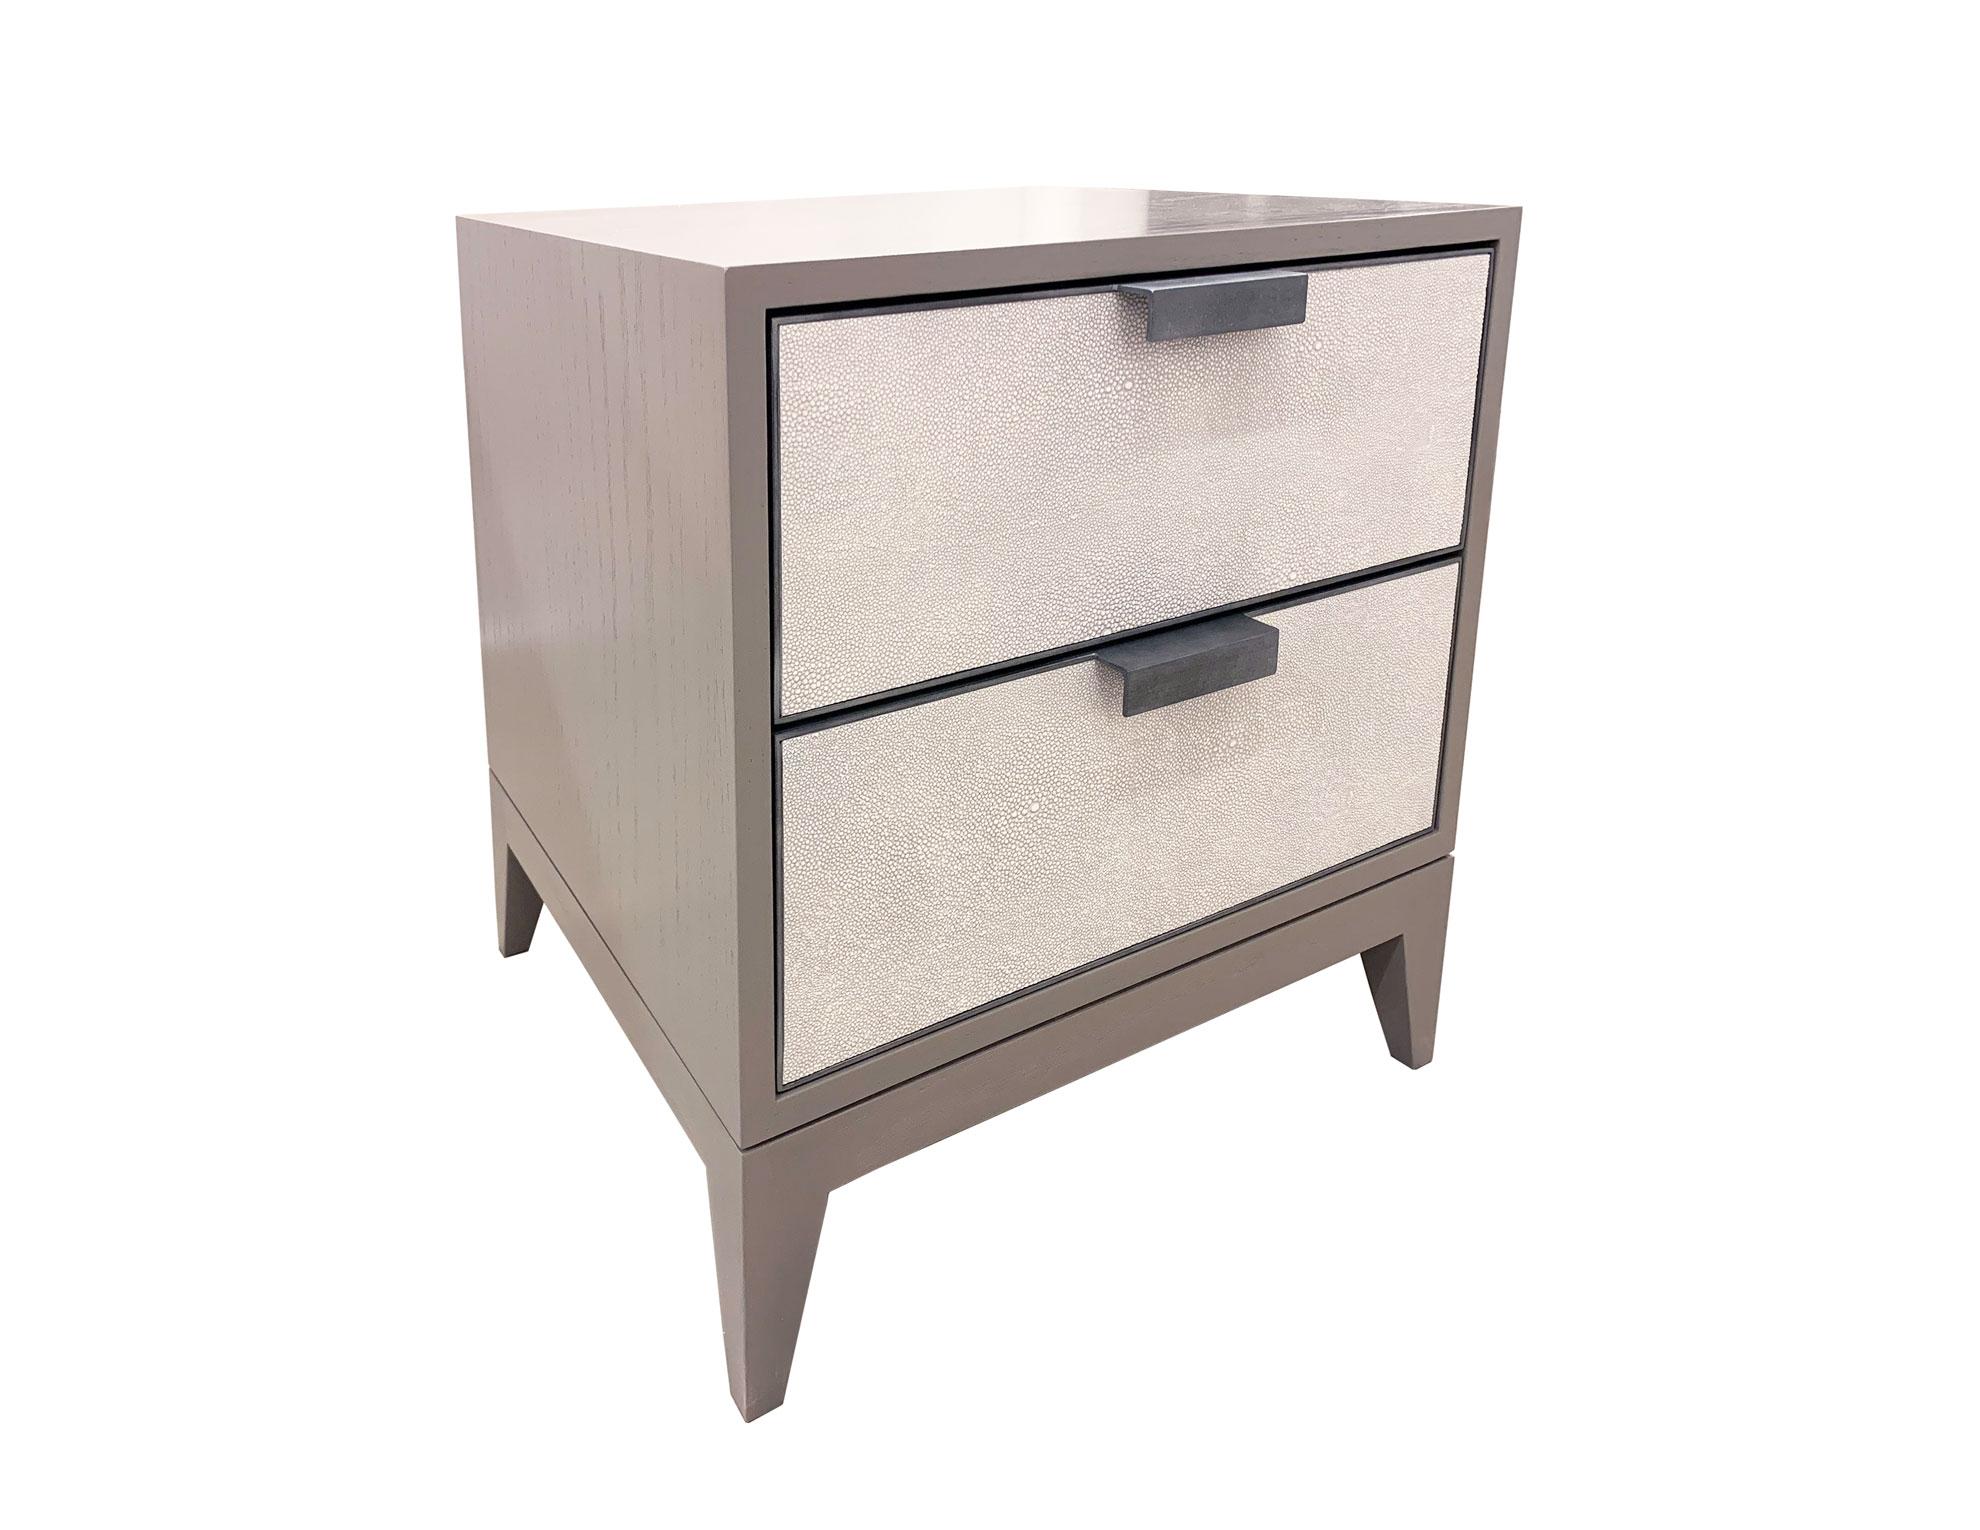 The Milnao Shagreen Leather Nightstand by Ercole home has a 2-door front, with Linen 2 wood finish on oak.
White/ light gray shagreen leather with hand-forged metal frames in pewter patina are on the drawer surface.
Custom sizes and finishes are